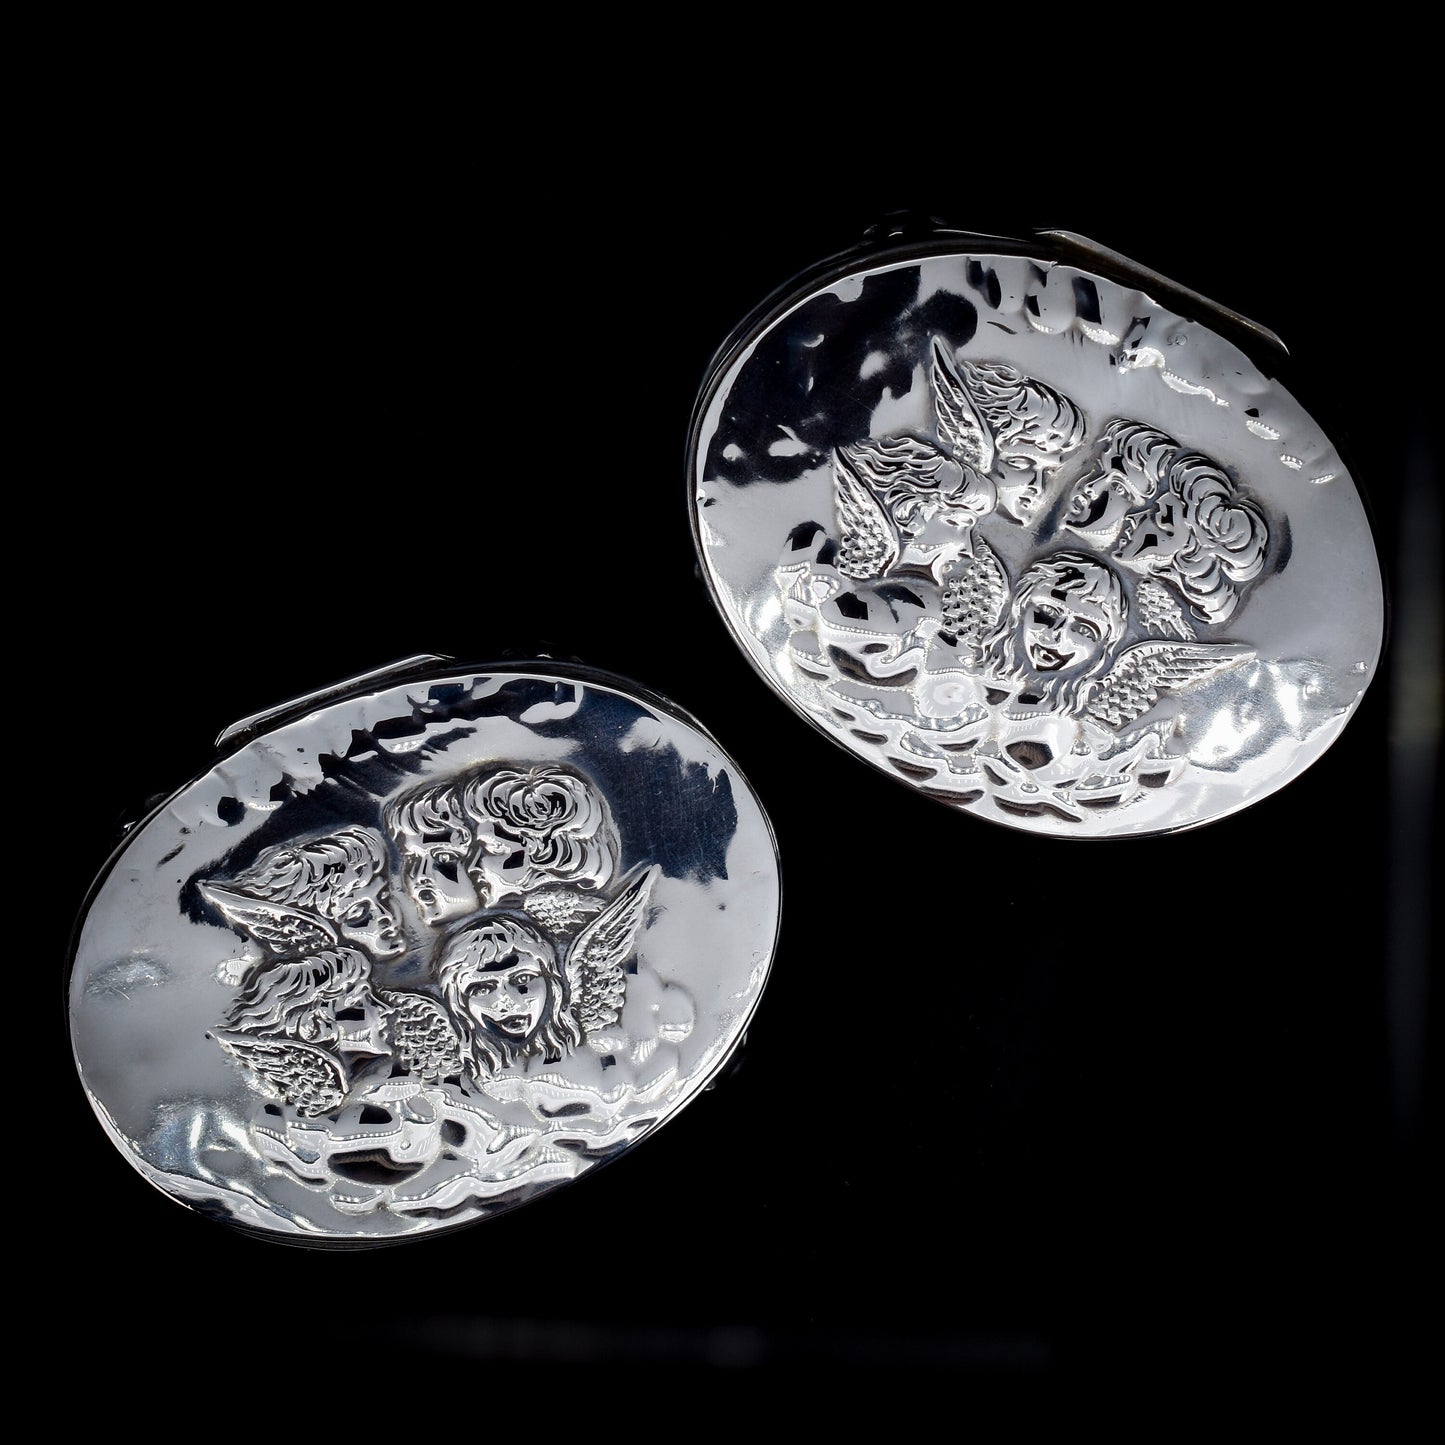 Pair of Antique Edwardian 1906 Hallmarked Angel Cherubs Oval Silver Jewellery Boxes